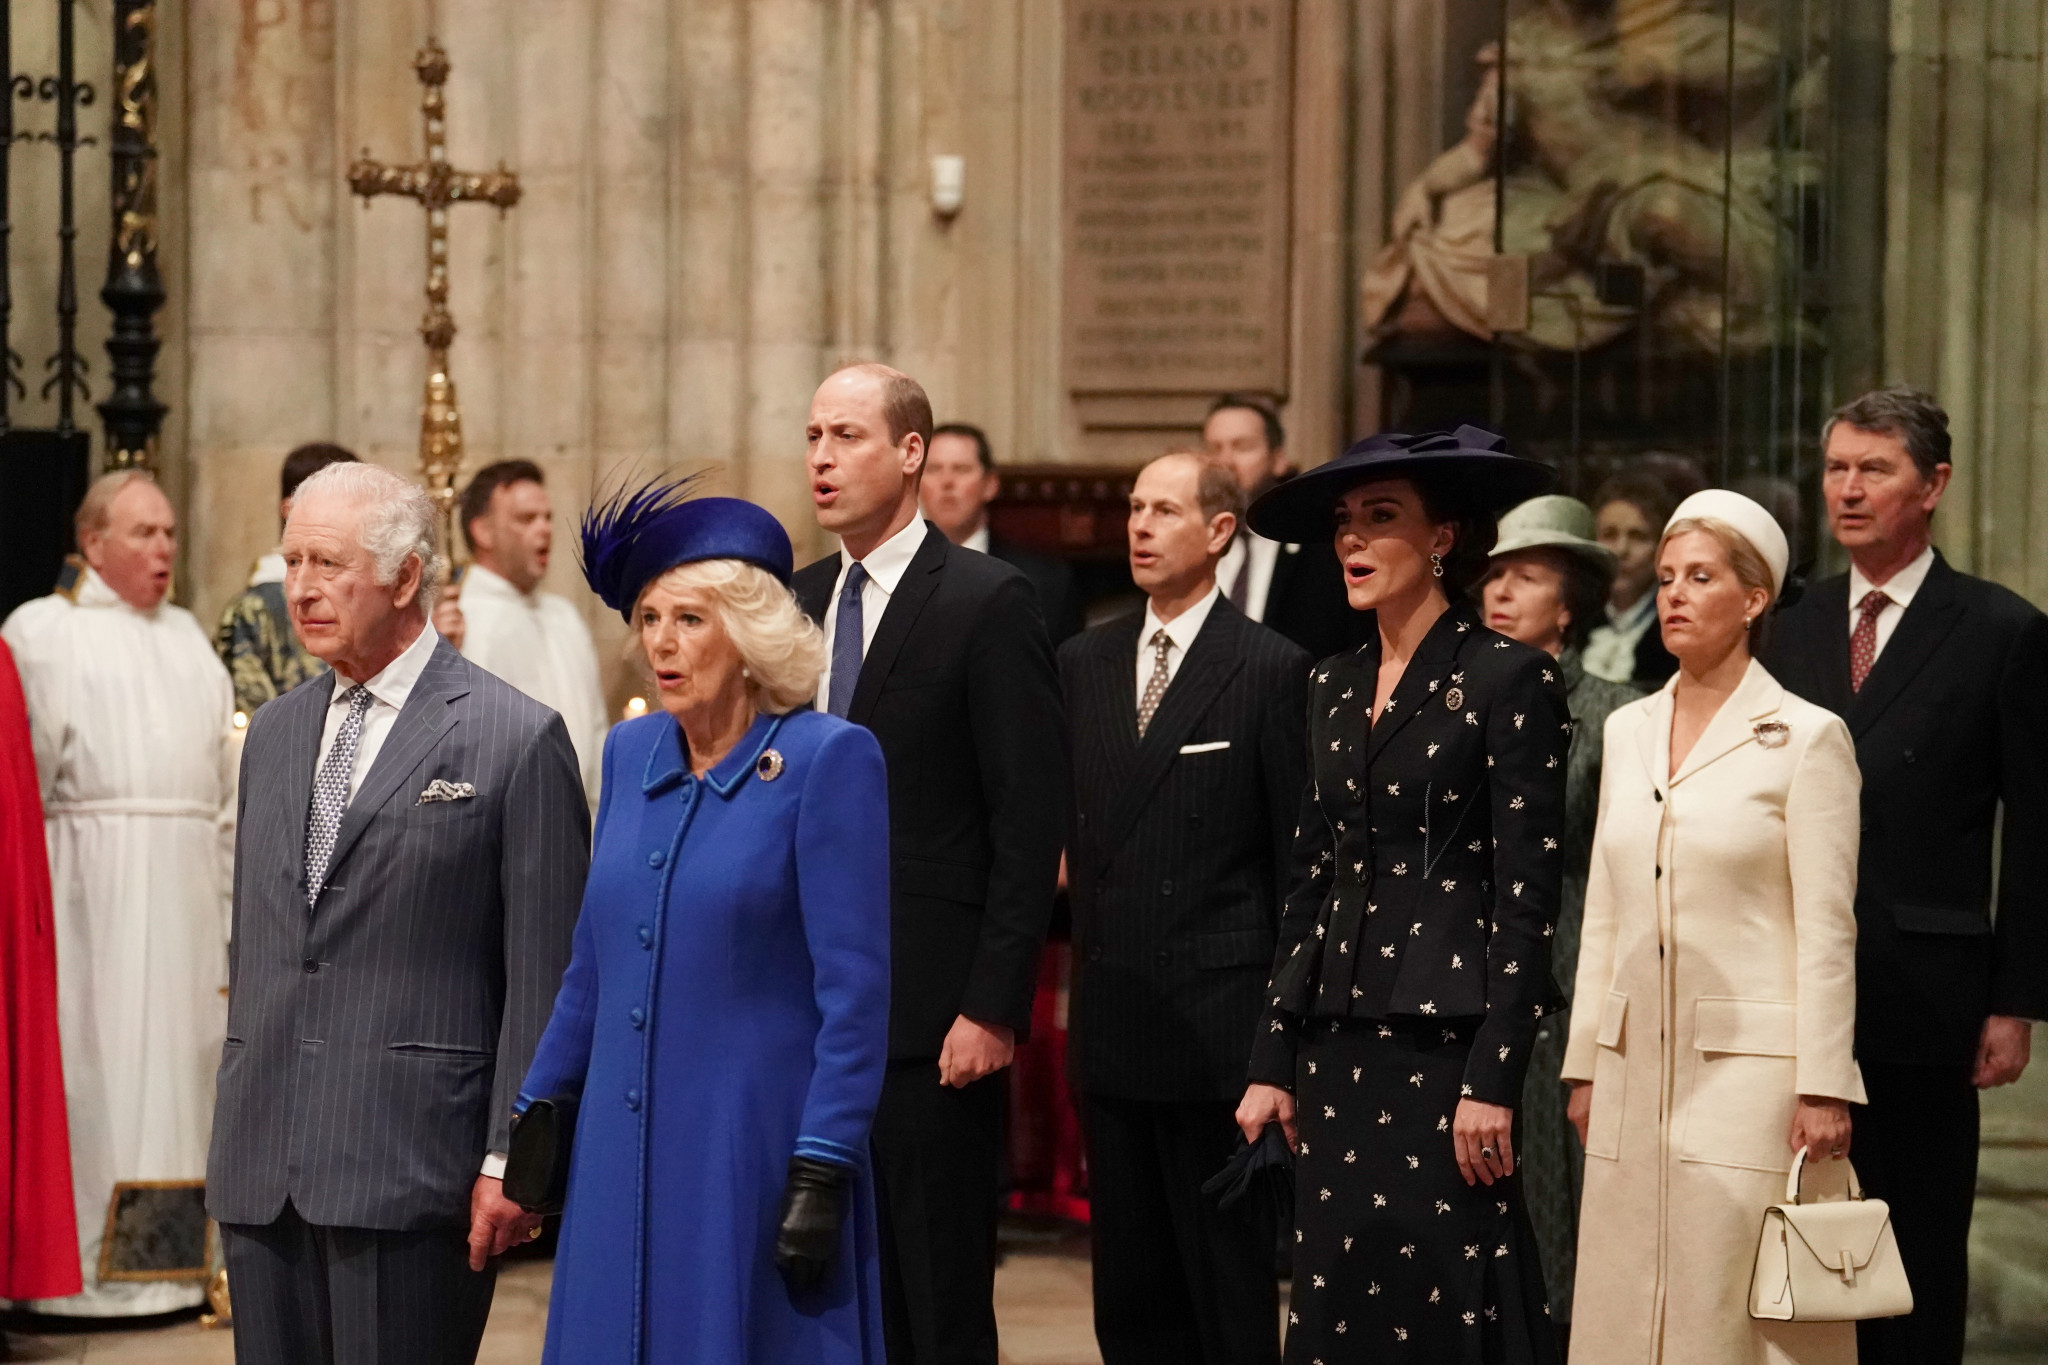 CGF vice-patron Prince Edward, centre, joined King Charles III, left, for the Commonwealth Day service at Westminster Abbey in London ©Getty Images